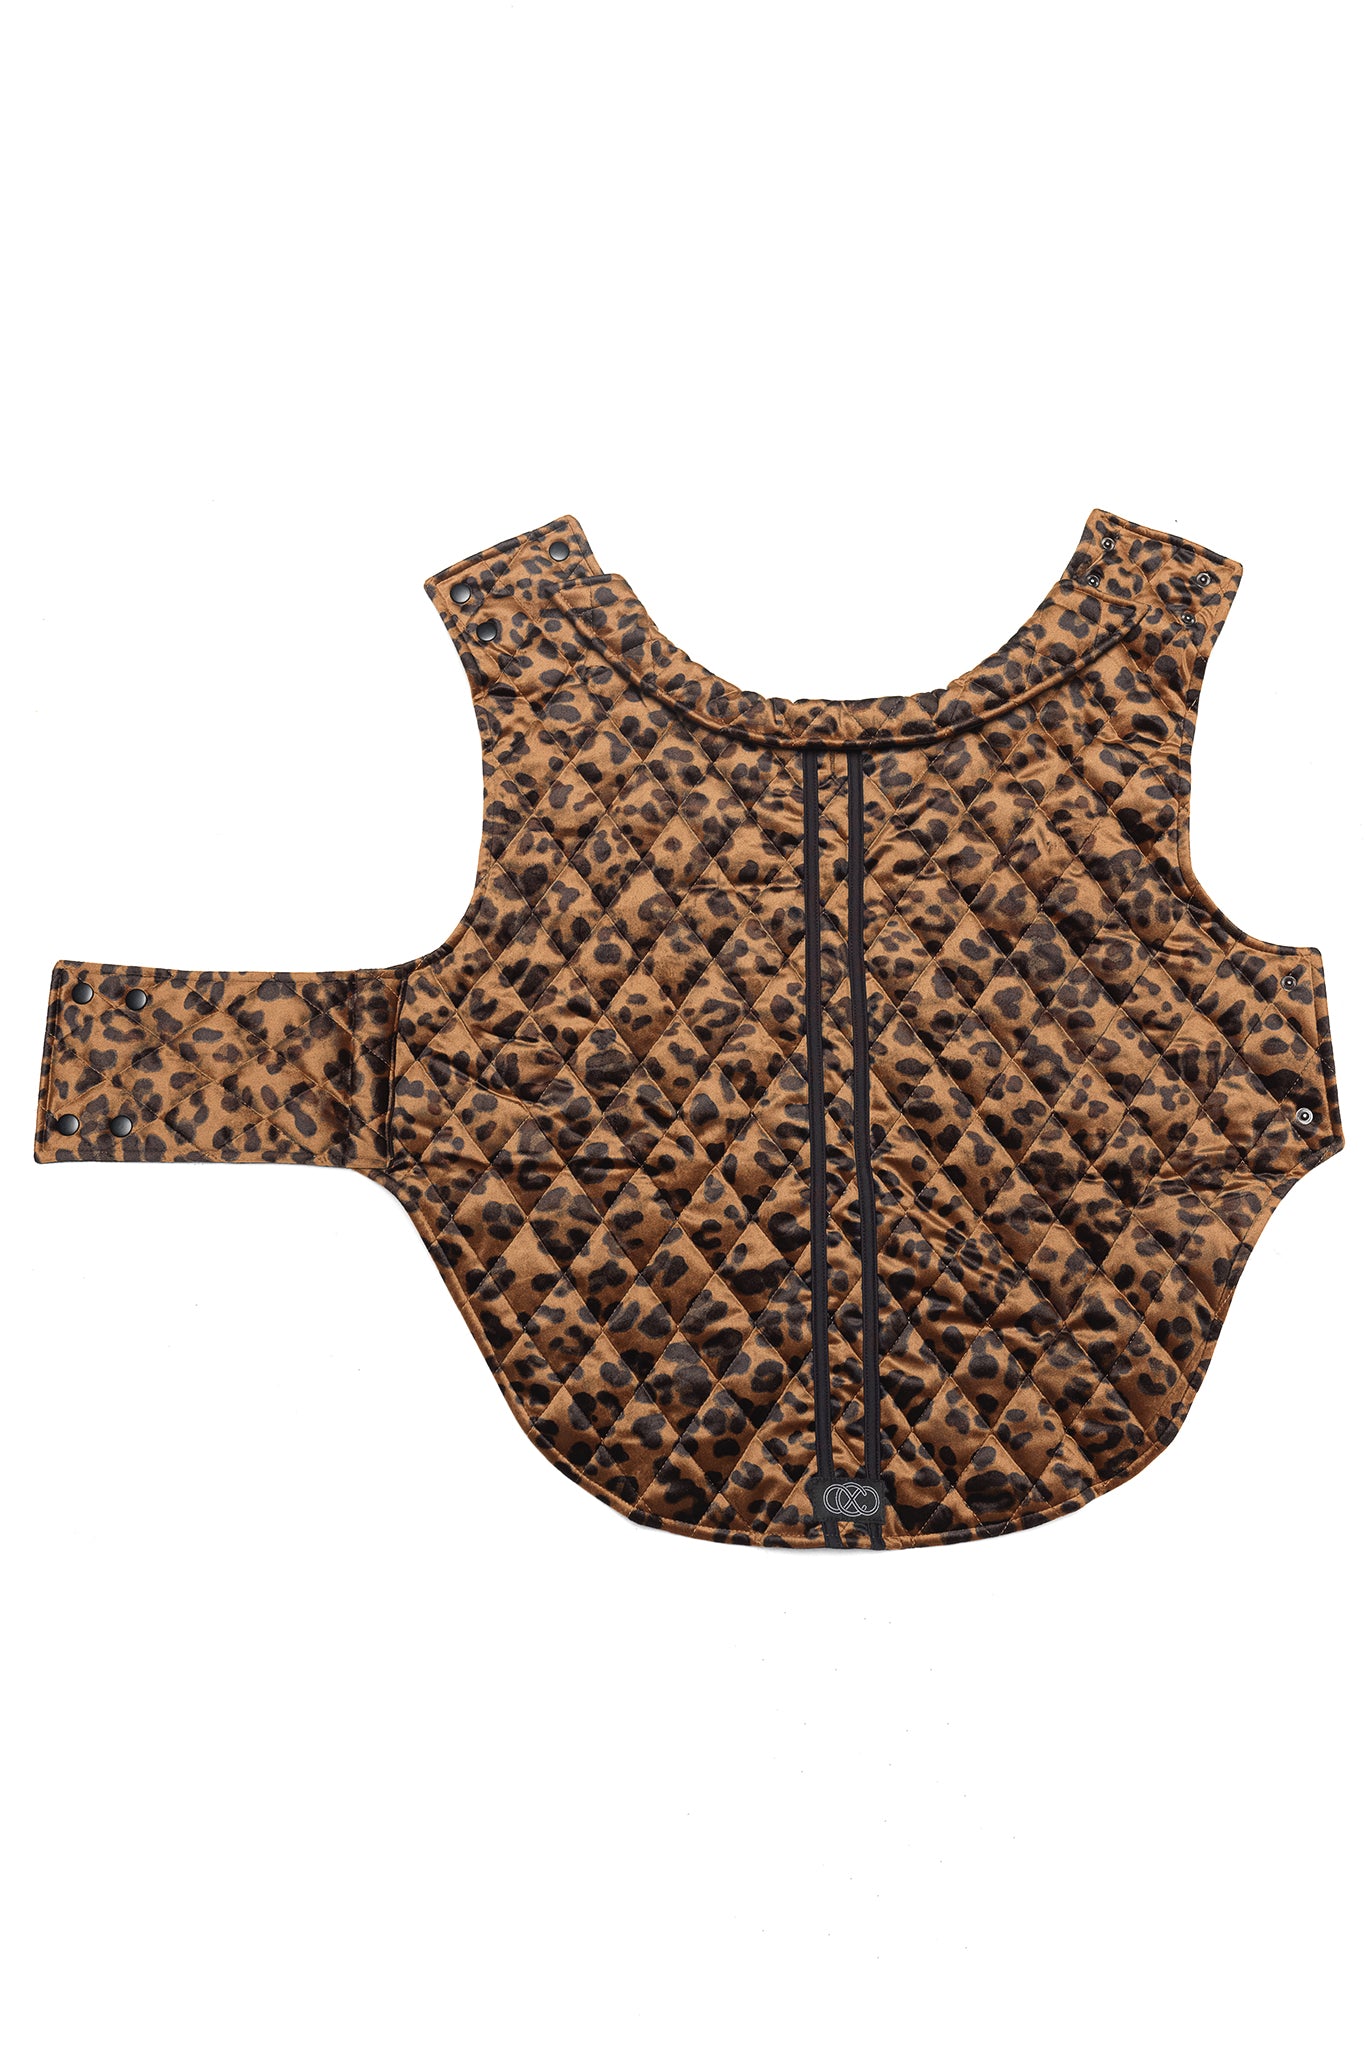 Furbaby Dog Coat in Bronzed Baby laid flat to show the exterior of the coat when opened up.